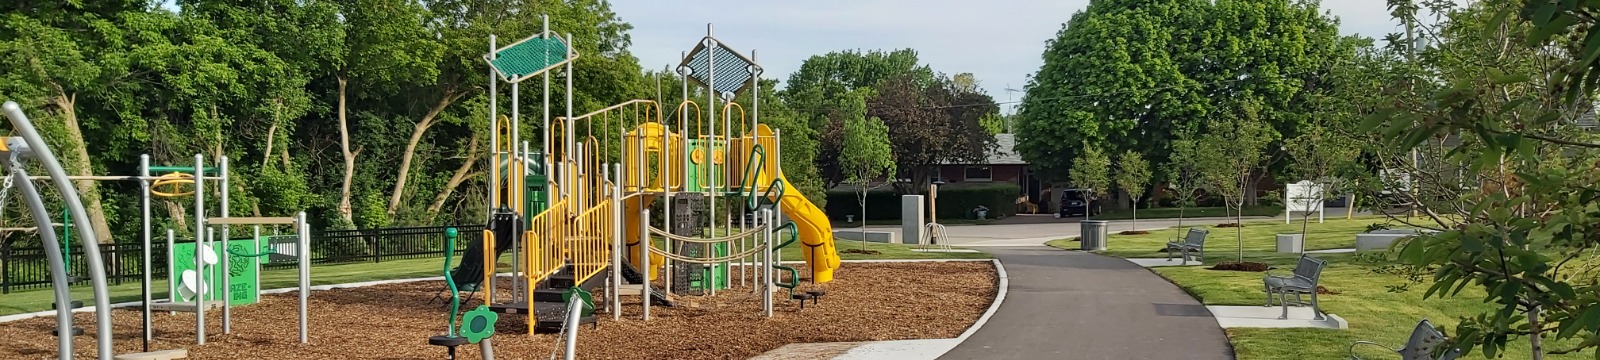 Image of Dr. Blake Parkette showing playground, pathway and other amenities